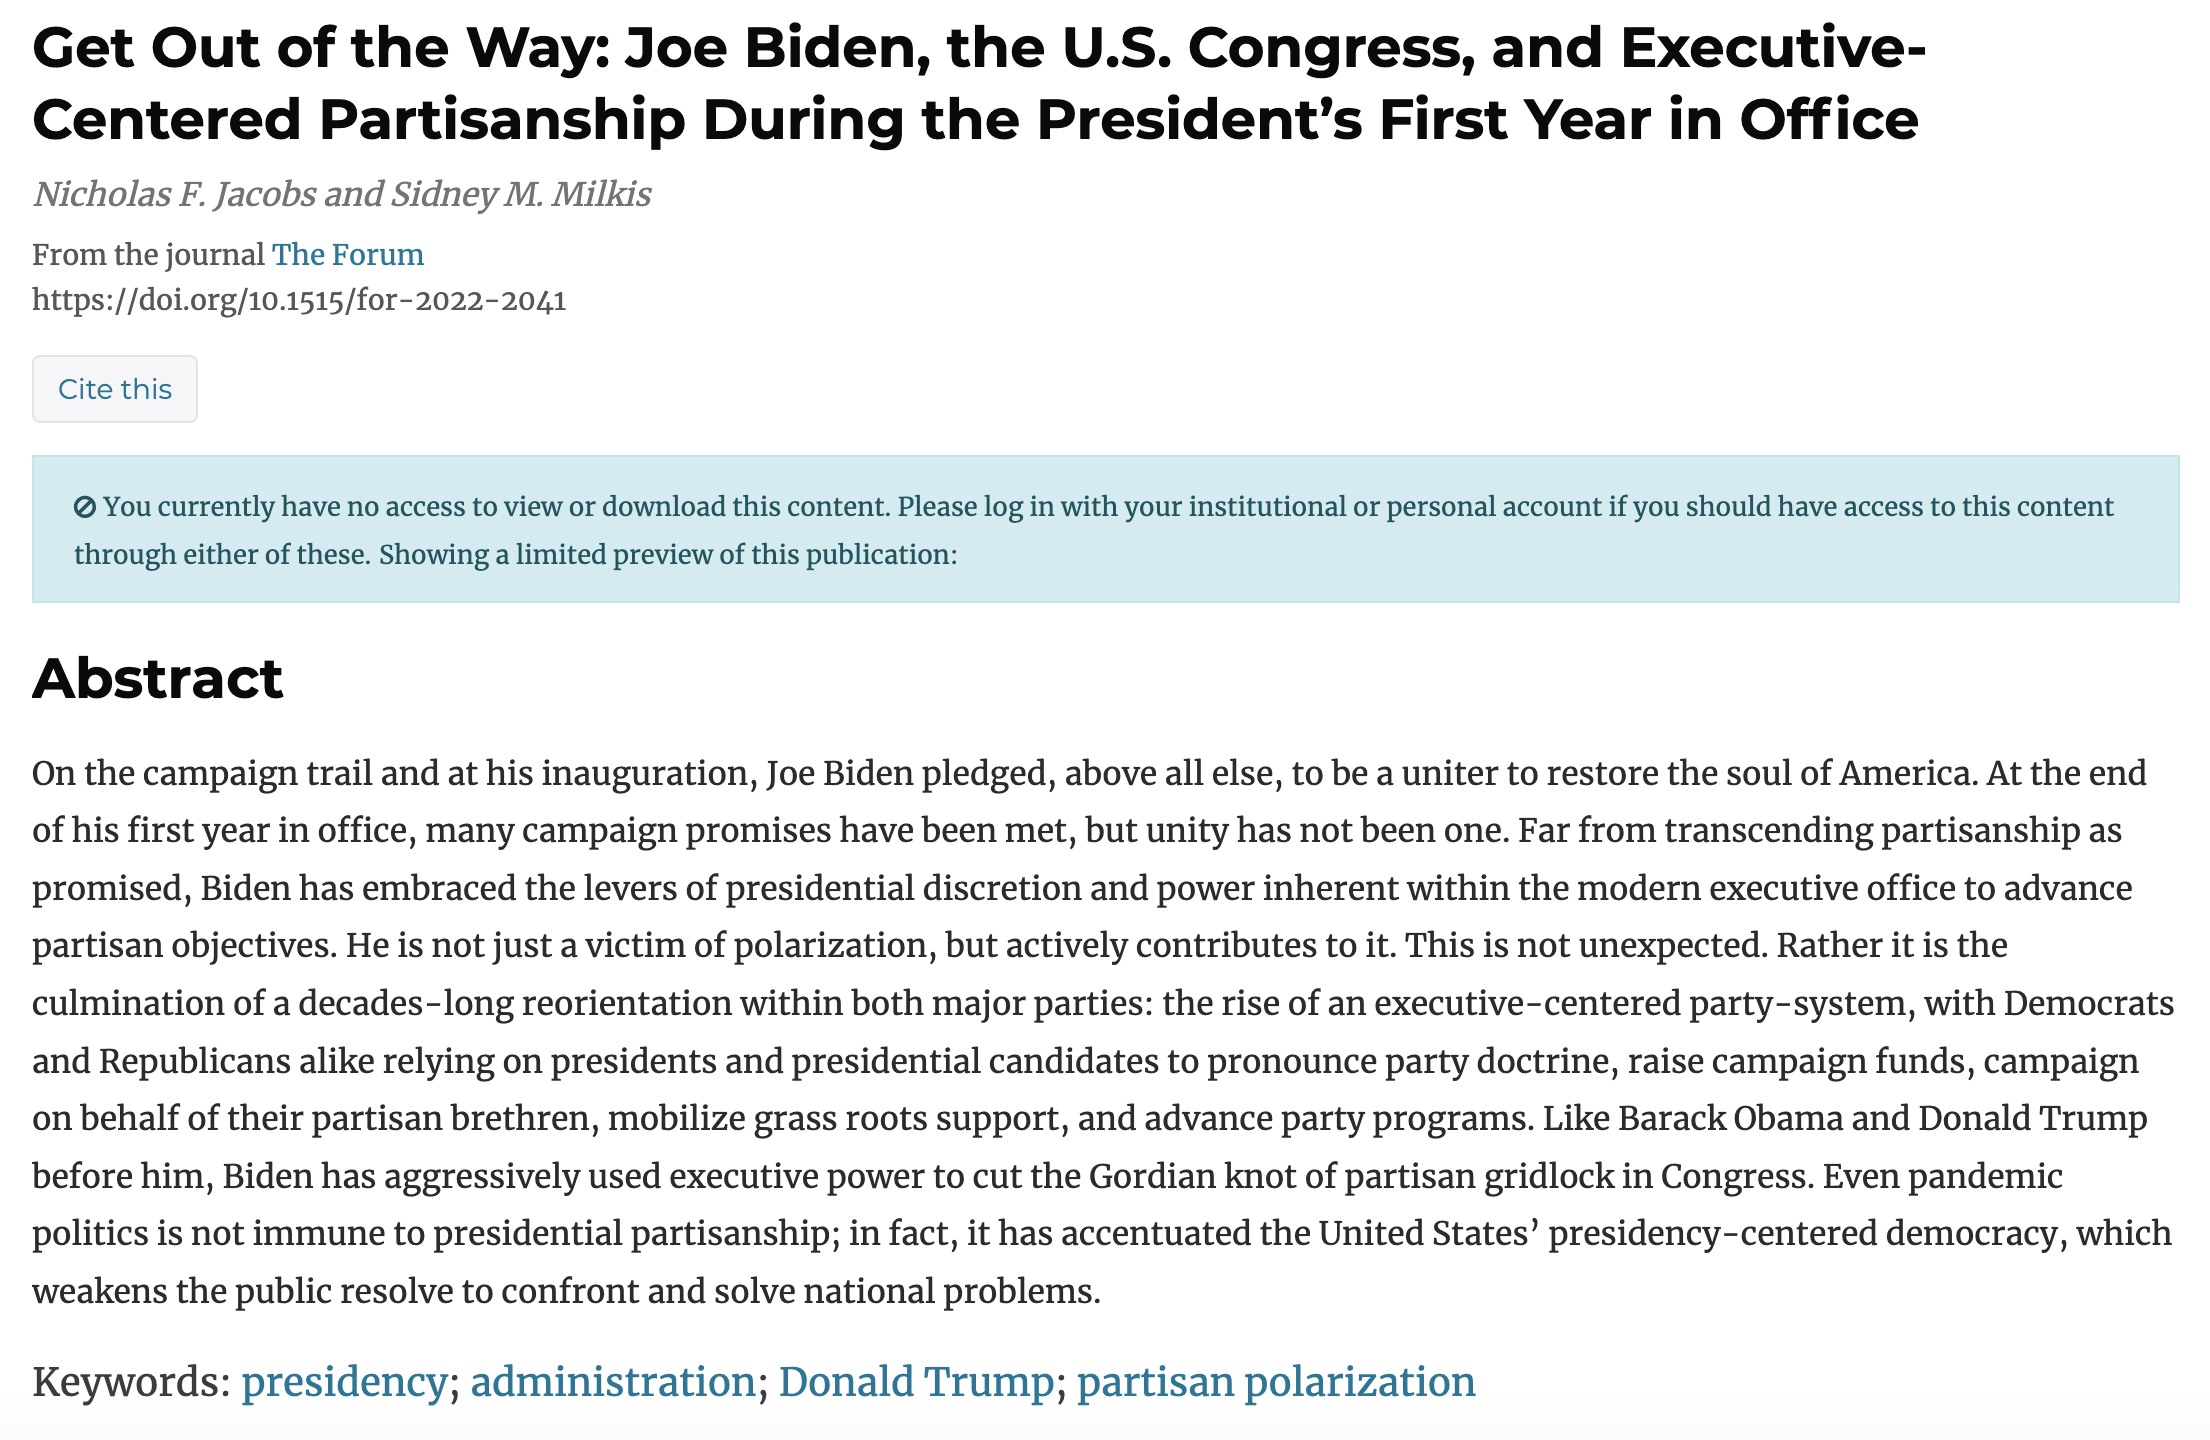 Get Out of the Way: Joe Biden, the U.S. Congress, and Executive-Centered Partisanship During the President’s First Year in Office